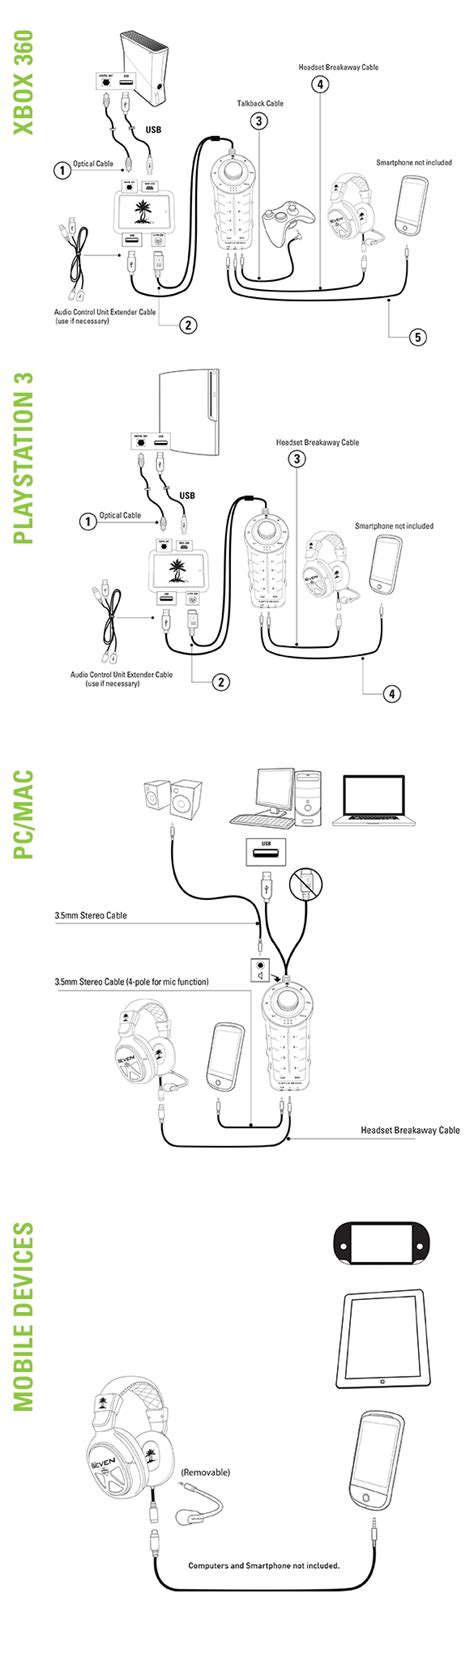 Xbox one stereo headset troubleshooting ifixit xbox av wiring diagram wiring diagrams. TheGamersRoom » Turtle Beach Ear Force XP SEVEN Series Headset Review